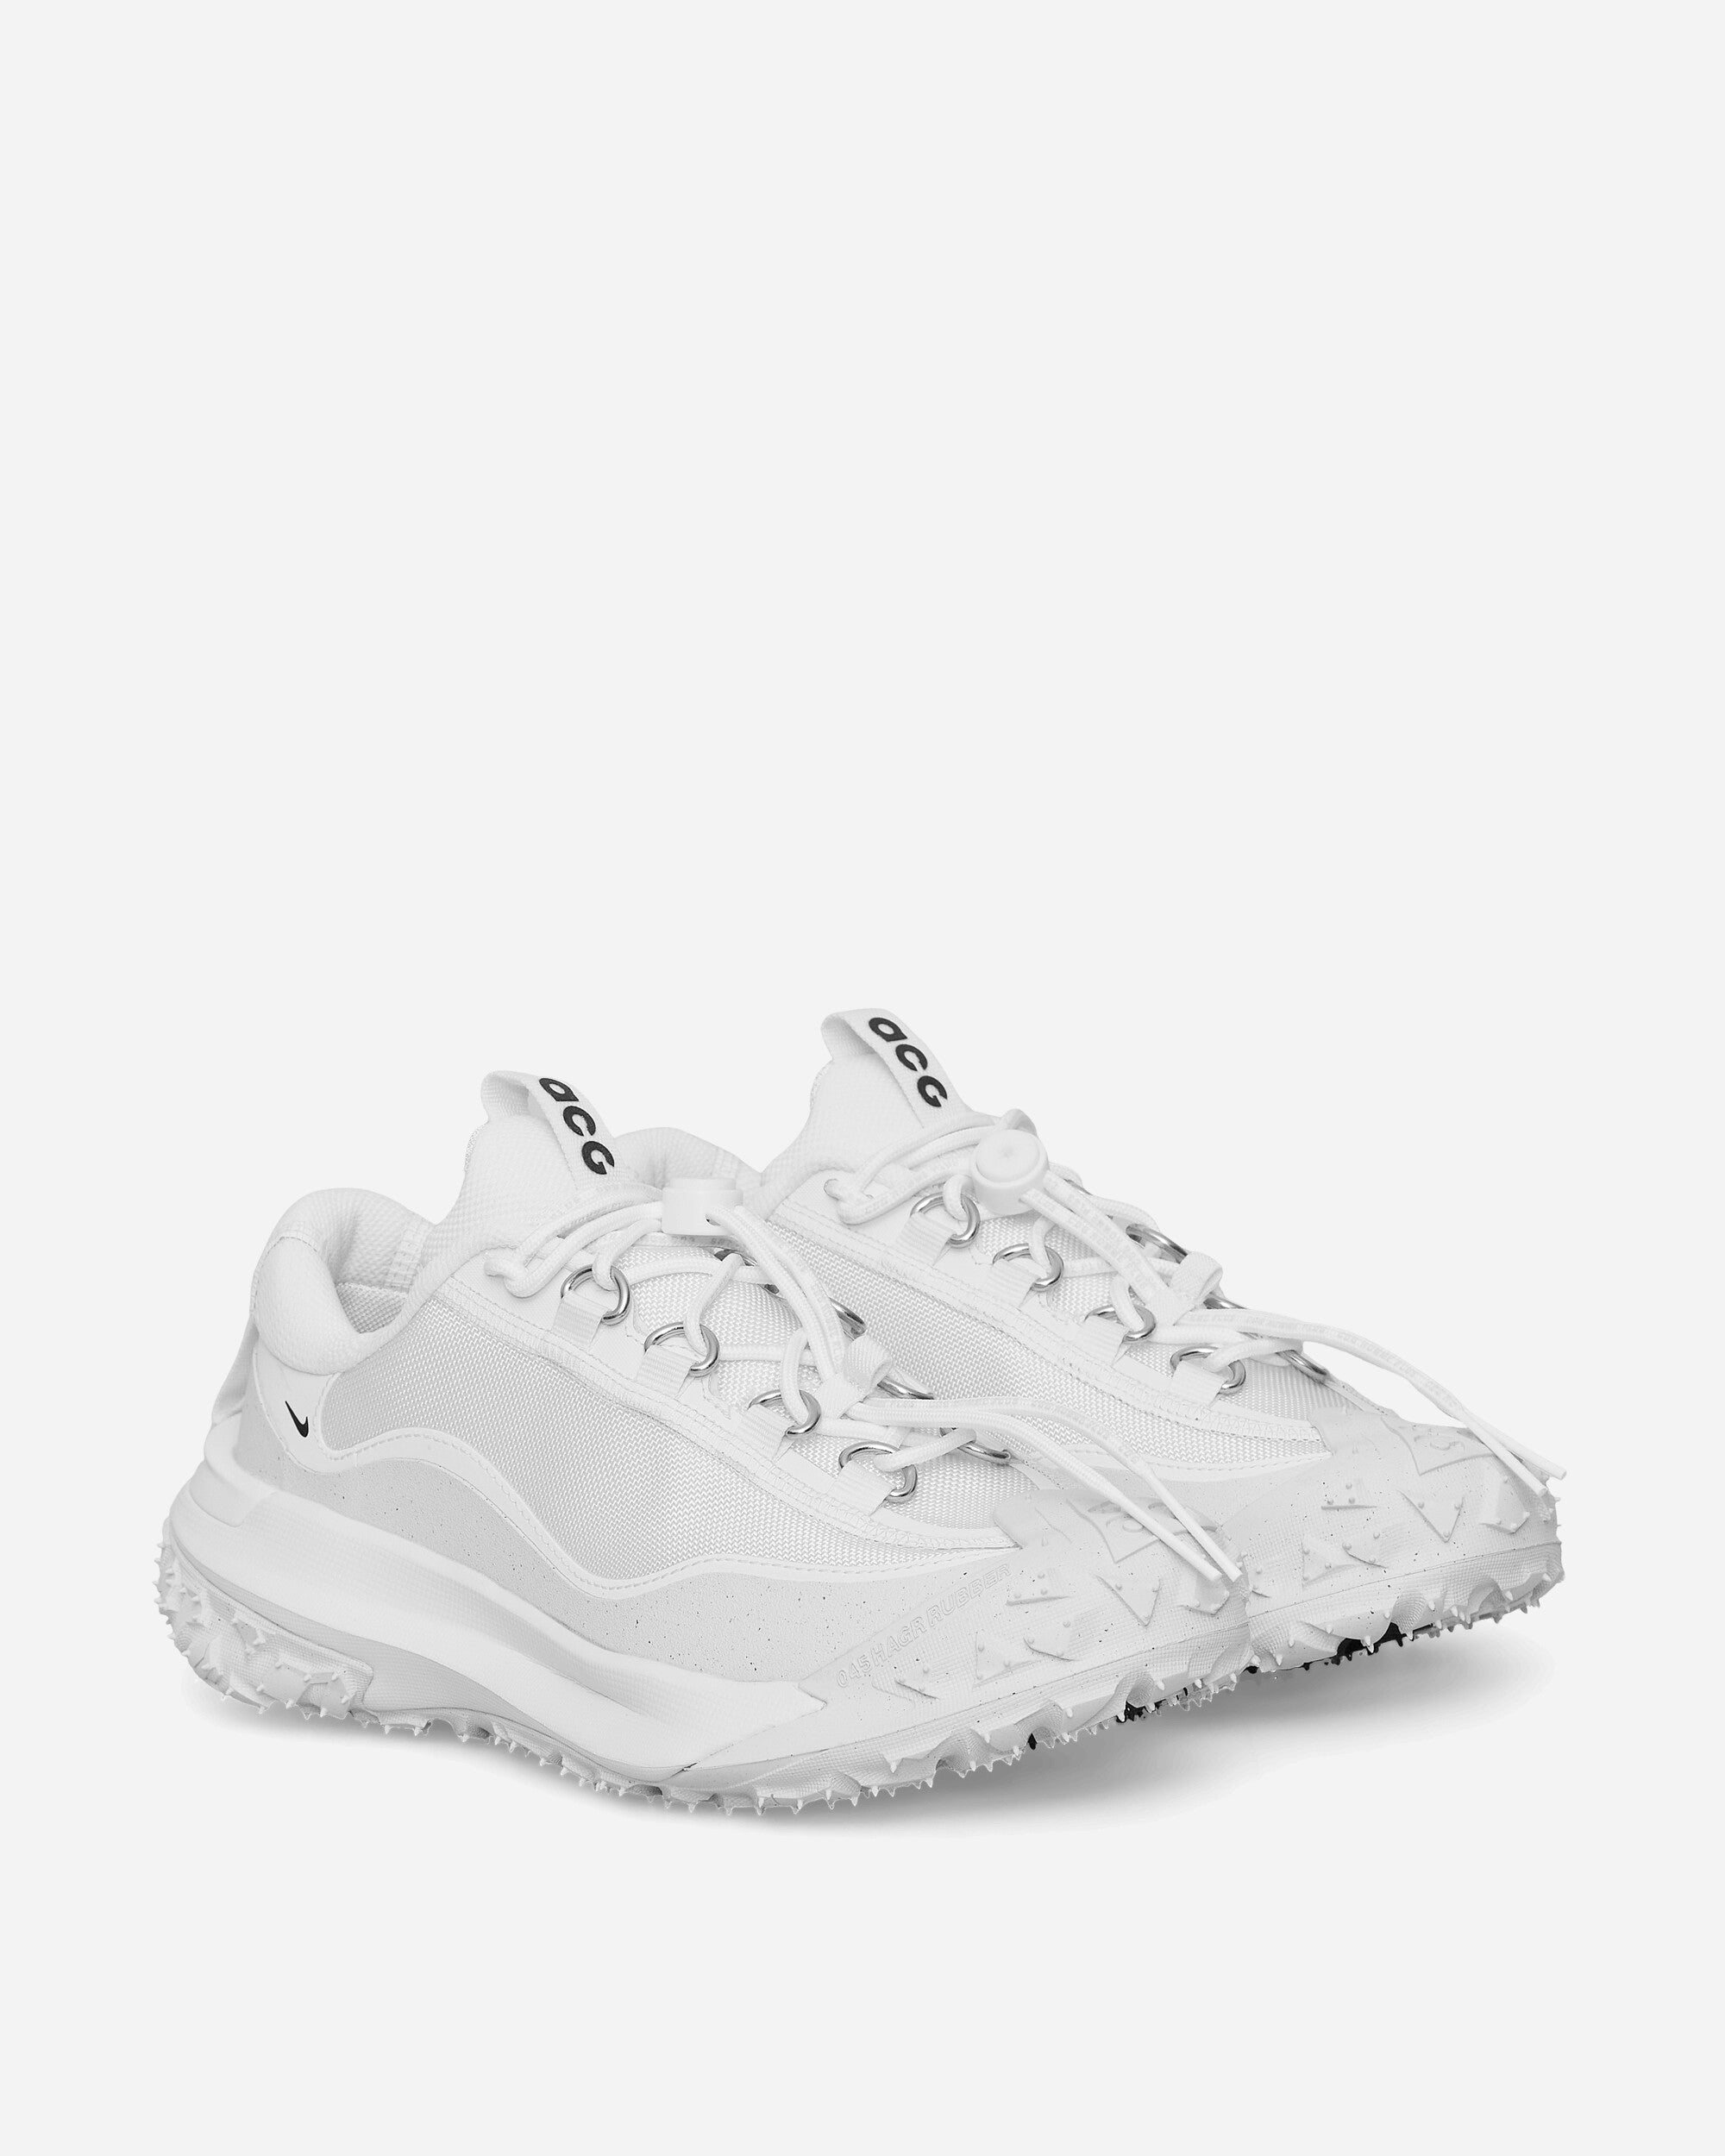 Nike ACG Mountain Fly 2 Low SP Sneakers White